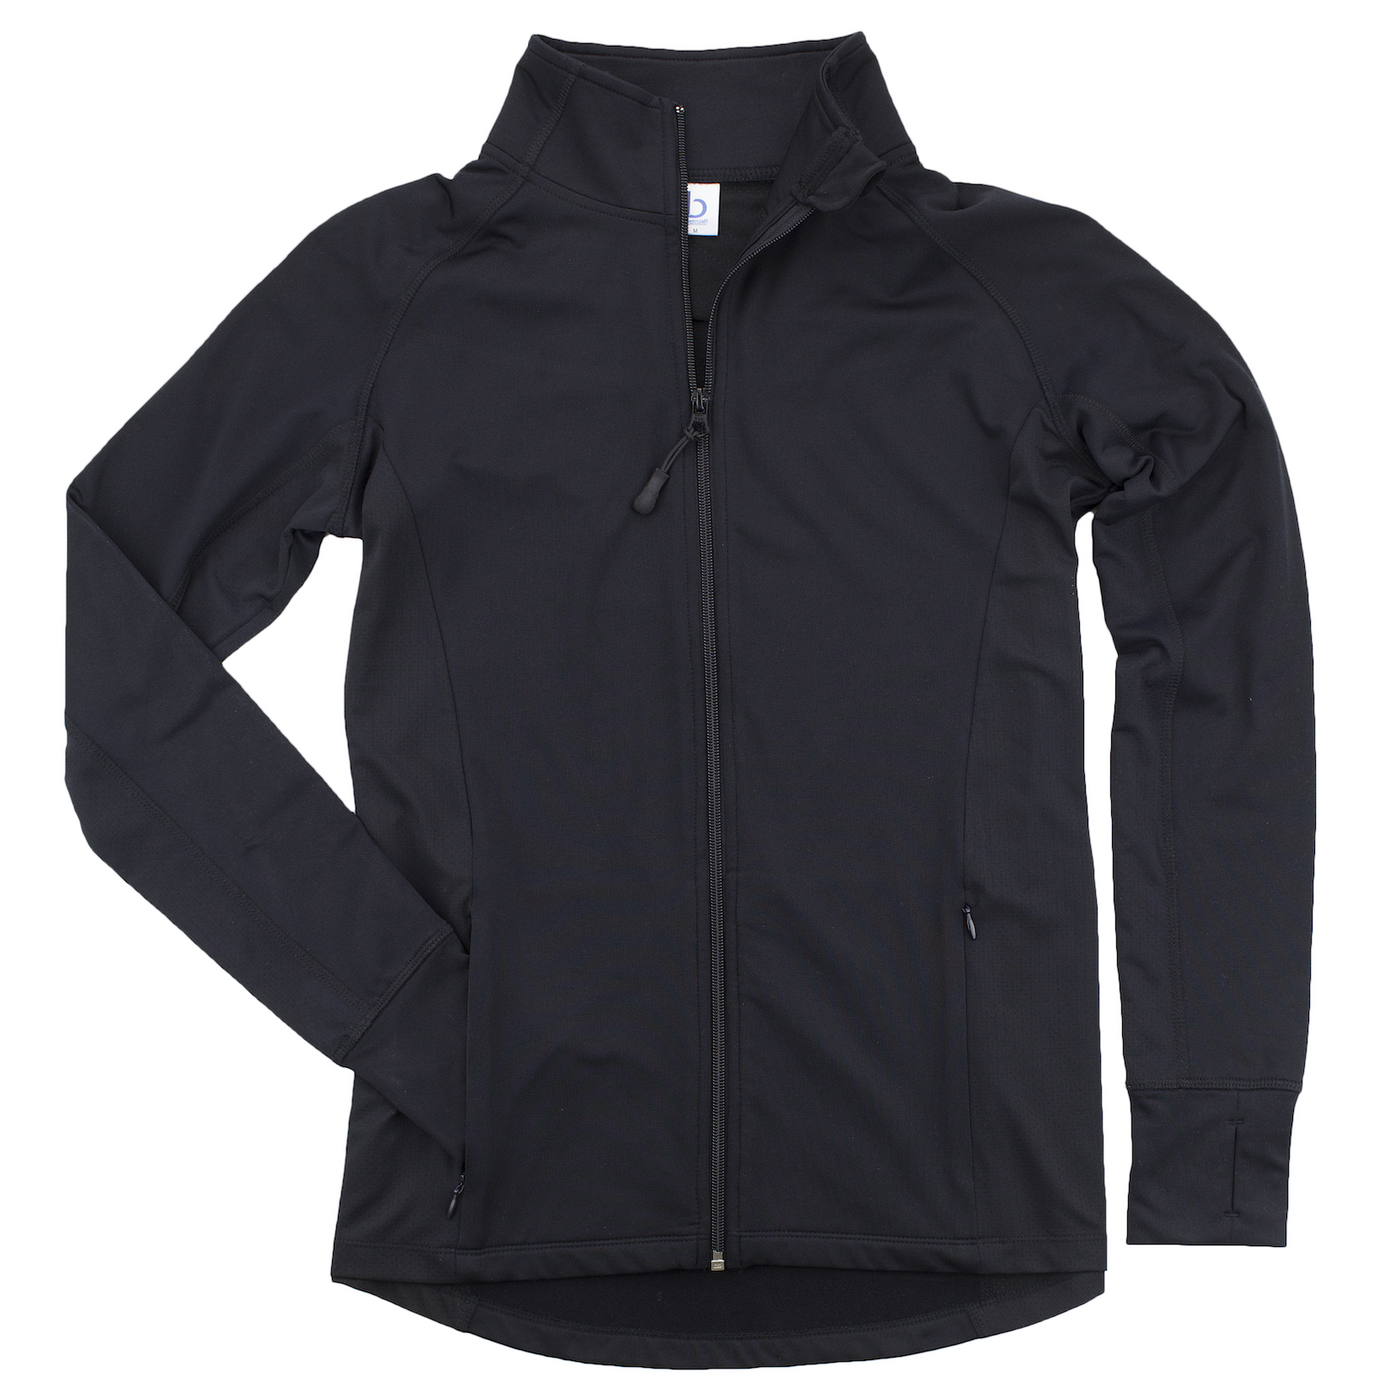 Girls Youth Mesh Insert Competition Jacket | Twirl